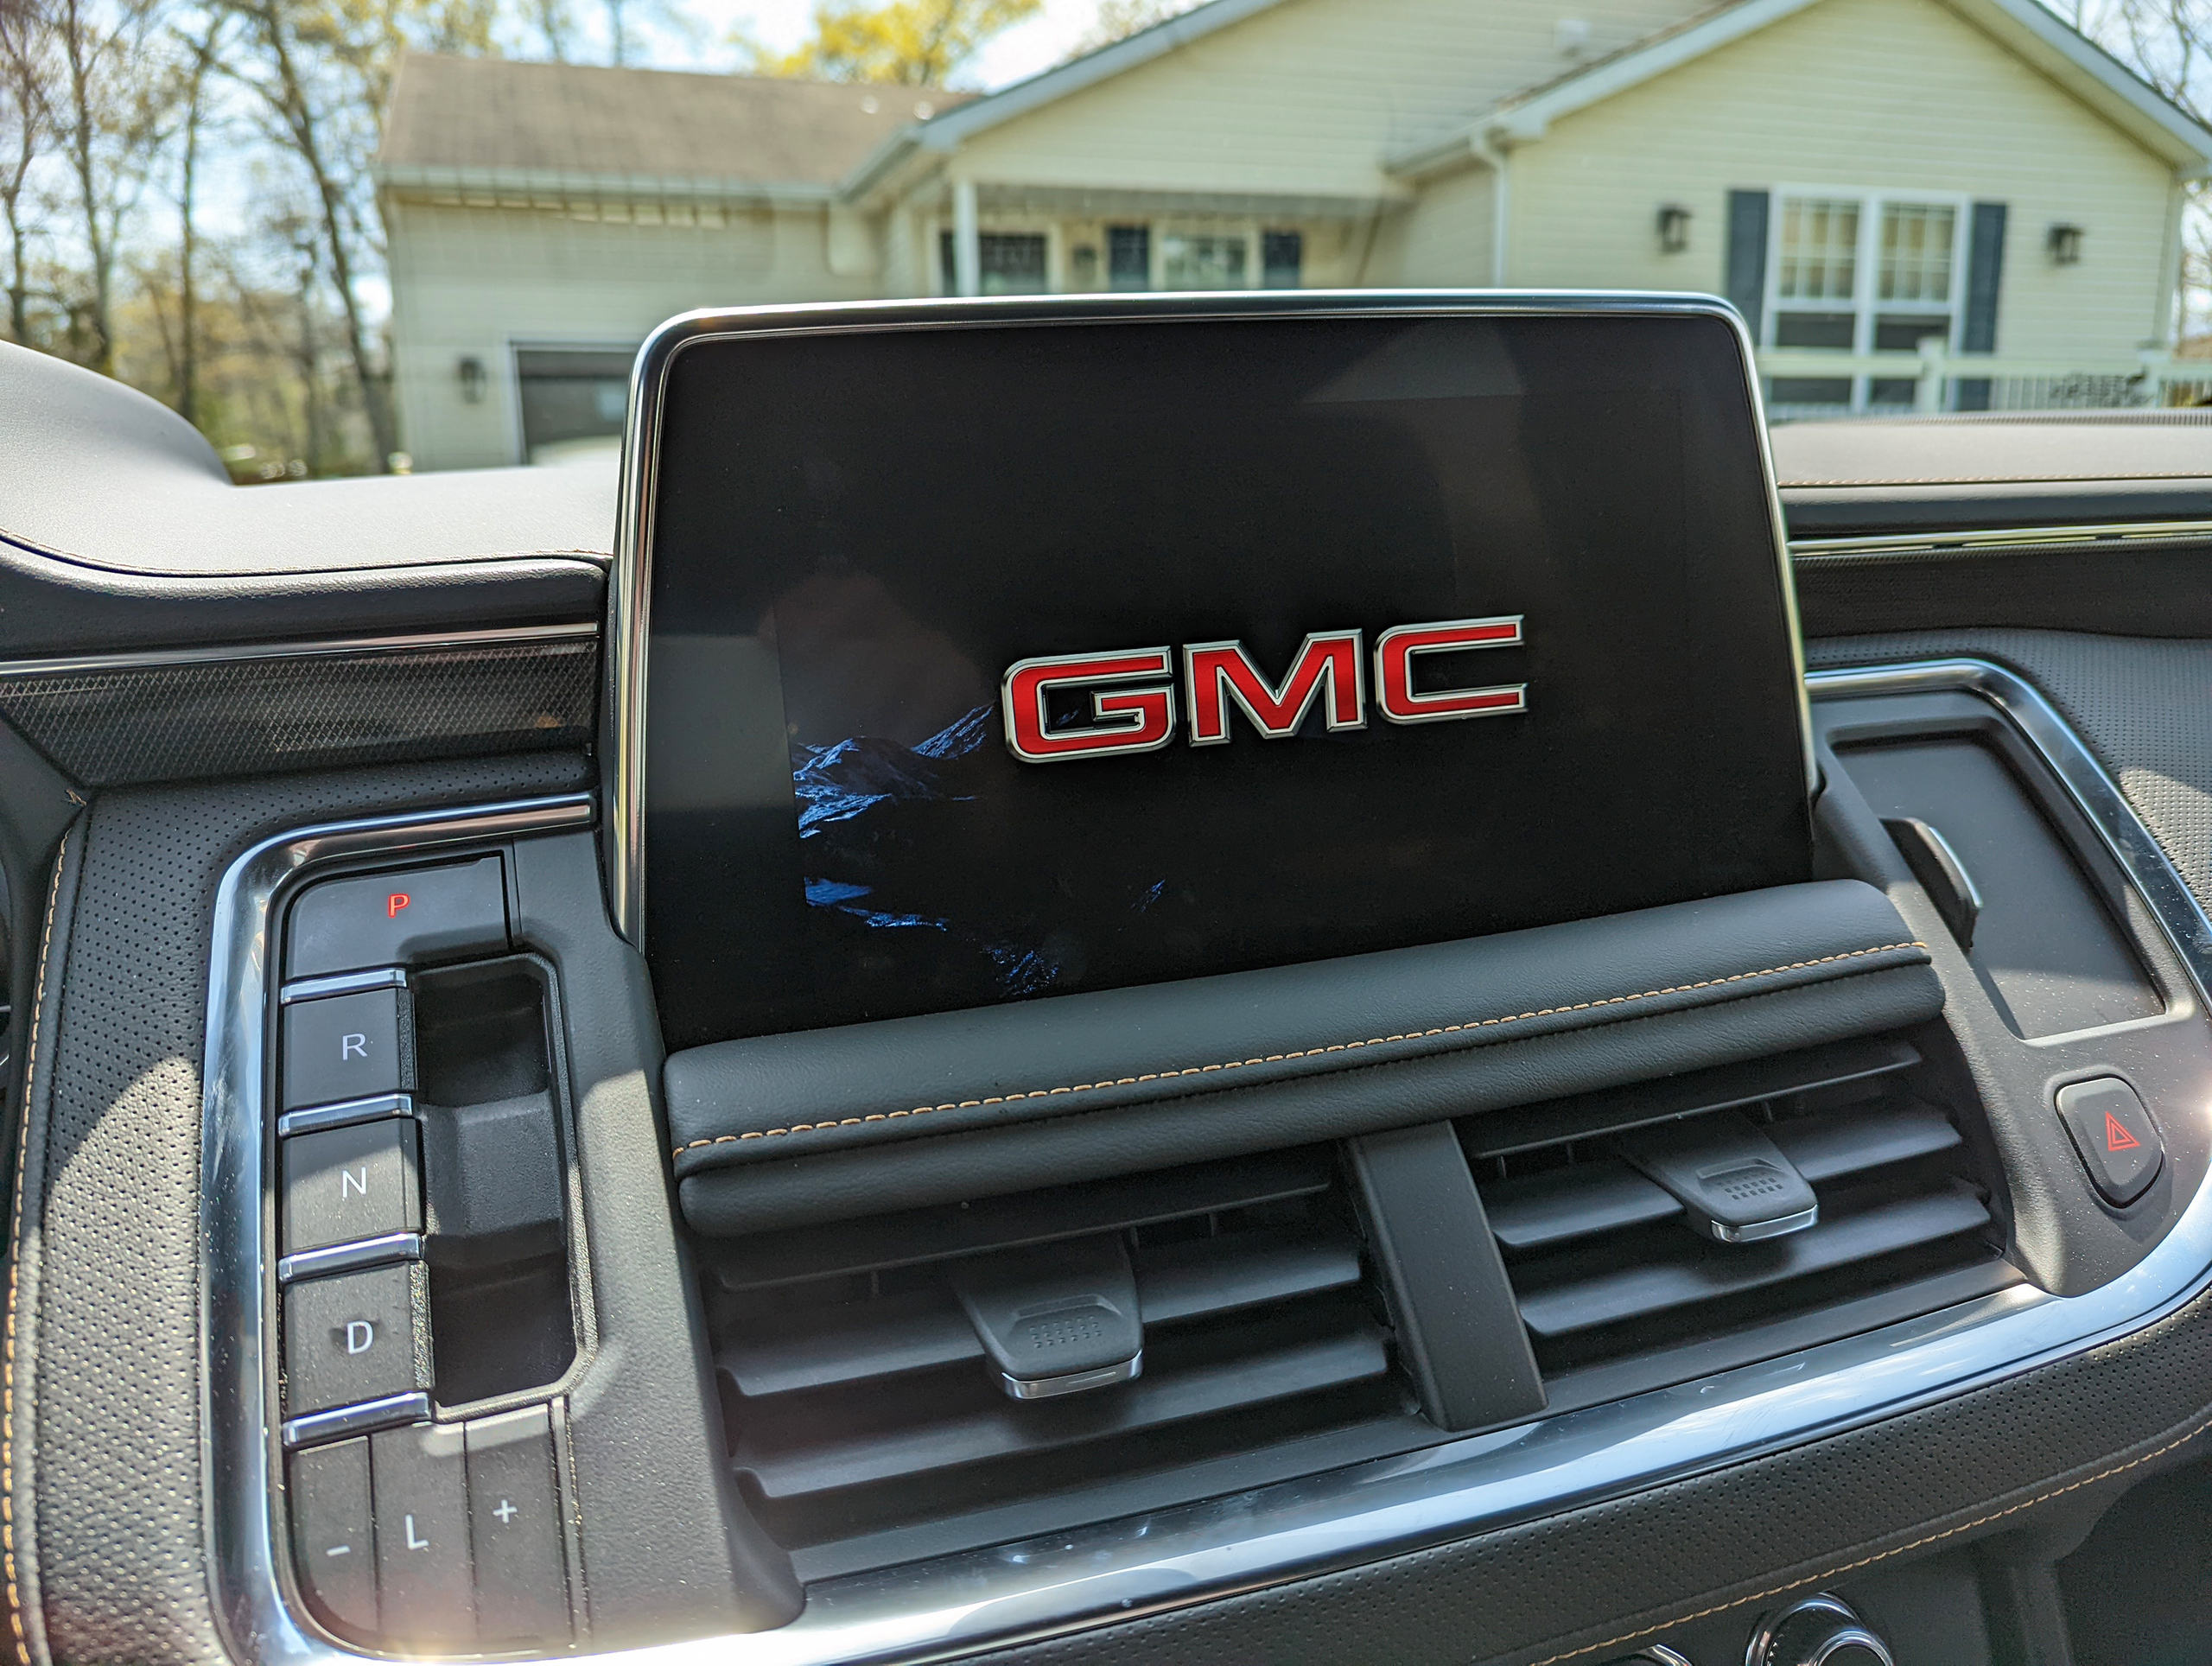 GM ditching CarPlay & Android Auto for Google-built infotainment system